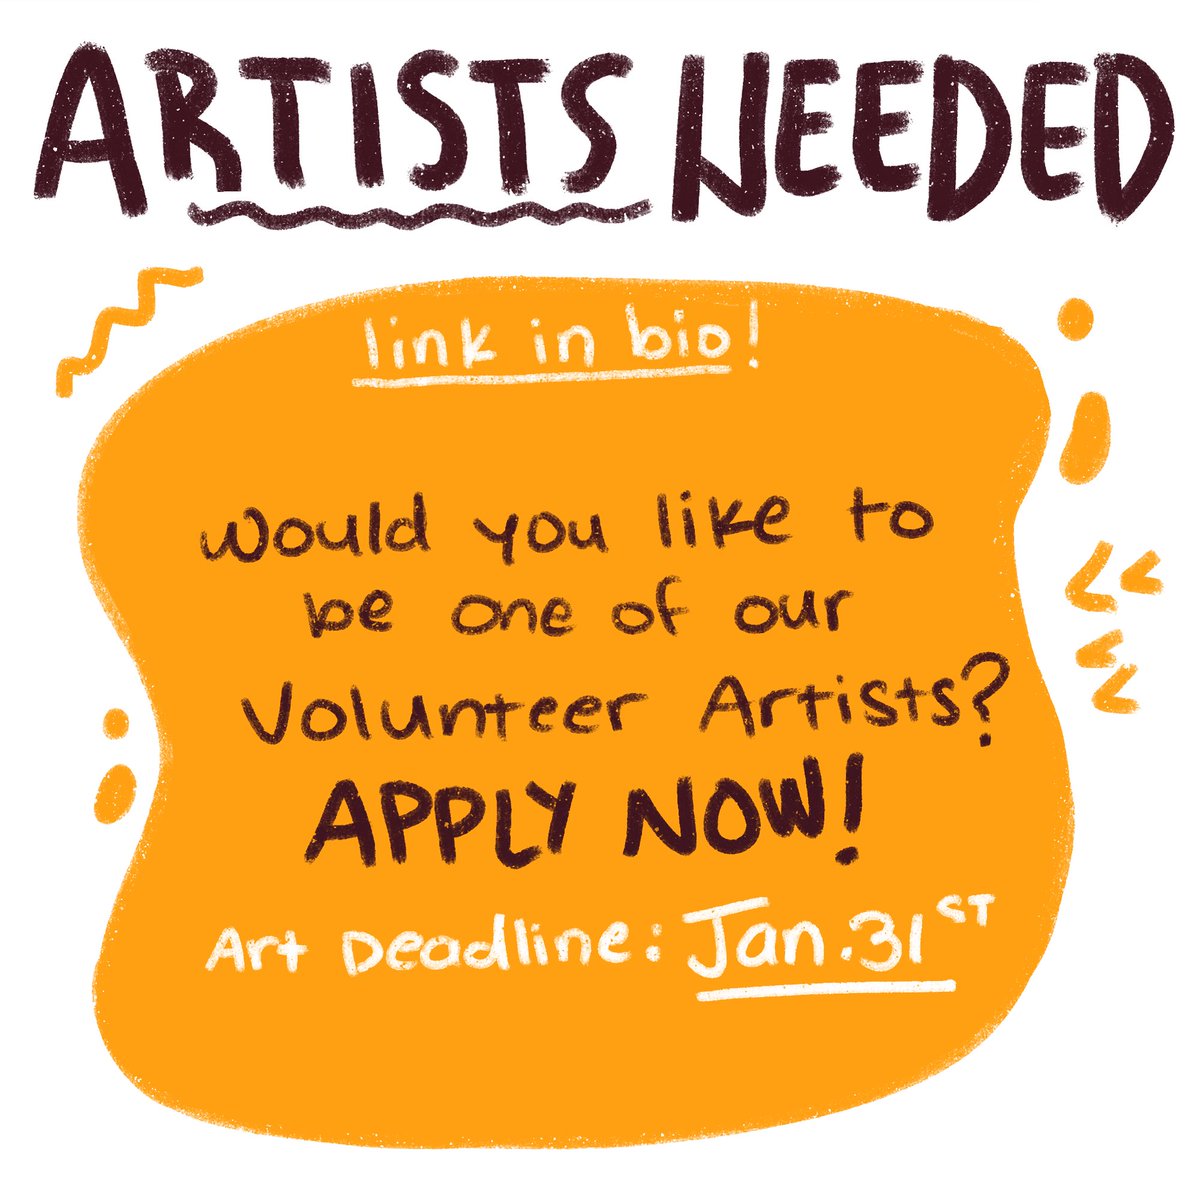 CALL FOR ARTISTS!! Would you like to contribute a piece to our artbook? We’re fundraising for Australia! Link to application in bio 🌱